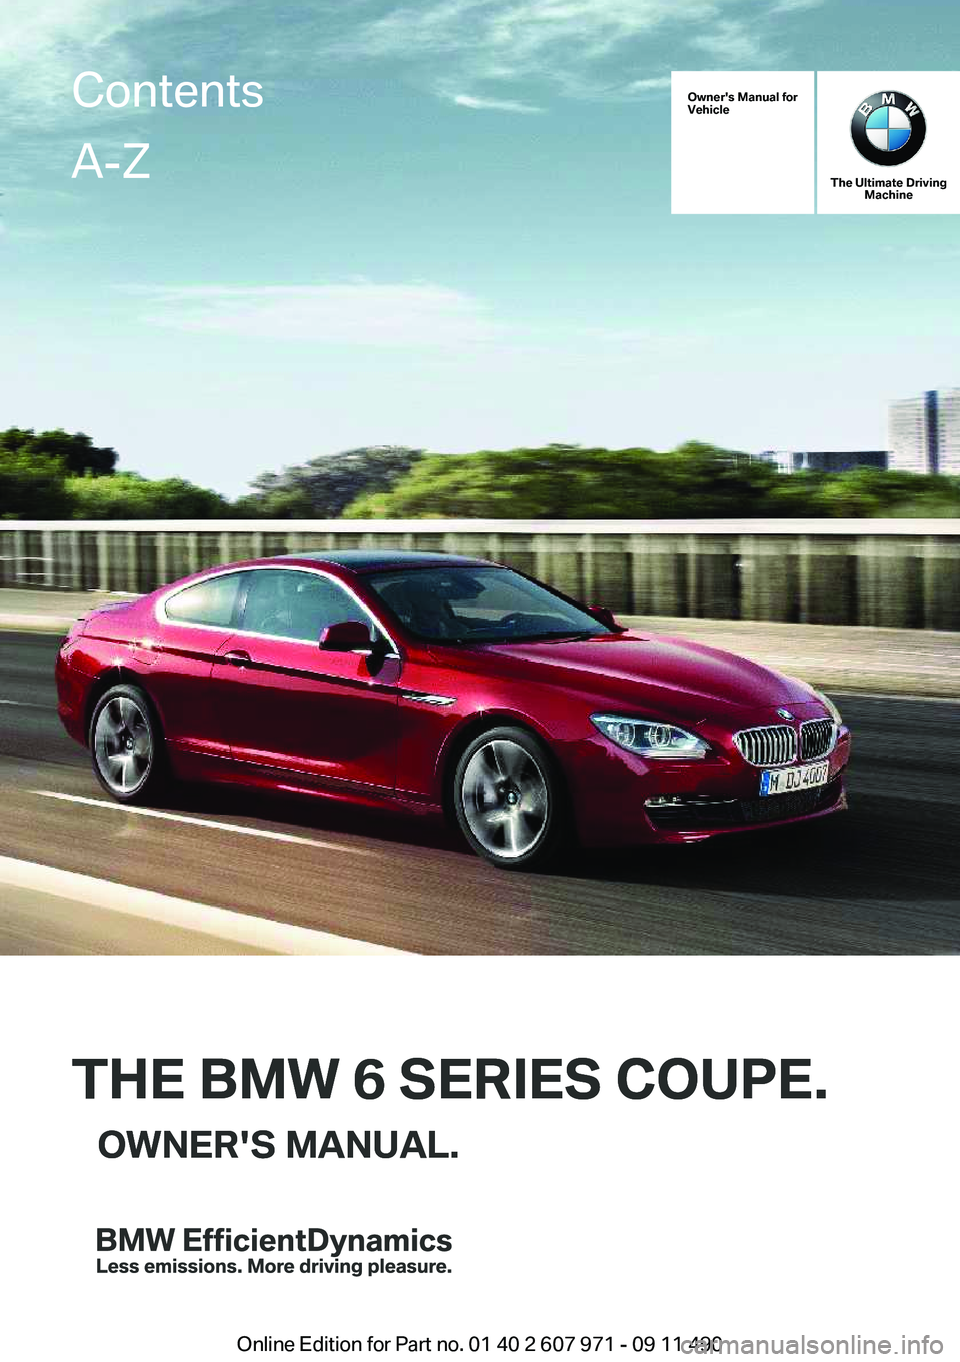 BMW 6 SERIES 2012  Owners Manual Owner's Manual for
Vehicle
THE BMW 6 SERIES COUPE.OWNER'S MANUAL.
The Ultimate Driving Machine
THE BMW 6 SERIES COUPE.OWNER'S MANUAL.
ContentsA-Z
Online Edition for Part no. 01 40 2 607 97